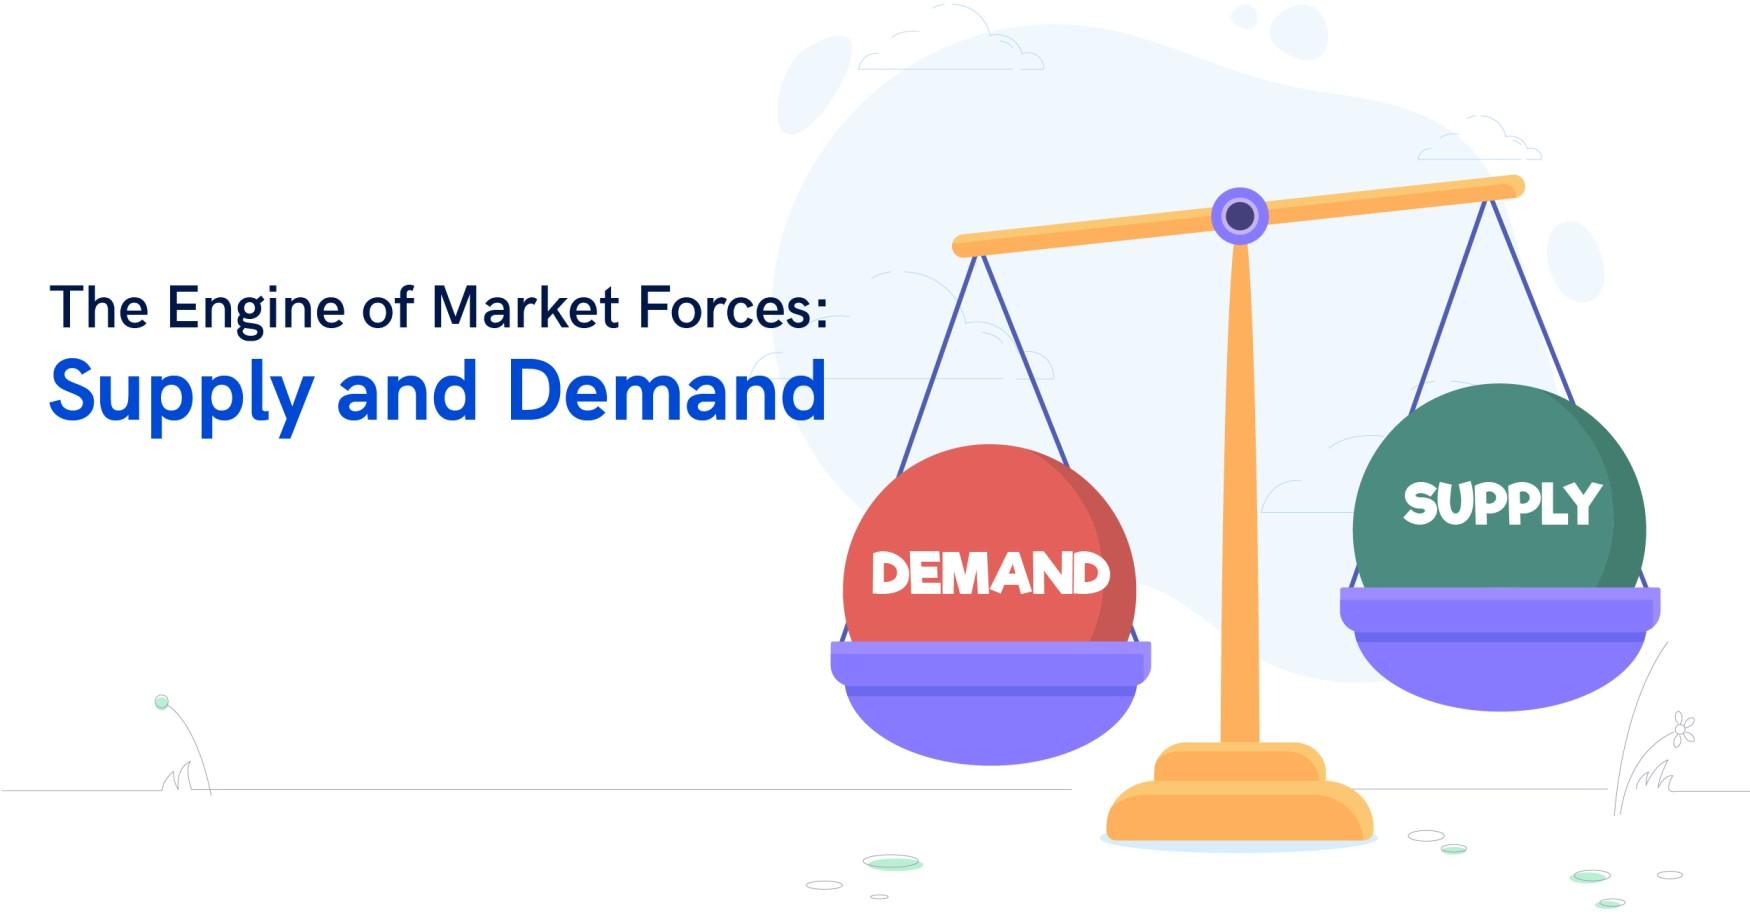 The Engine of Market Forces: Supply and Demand